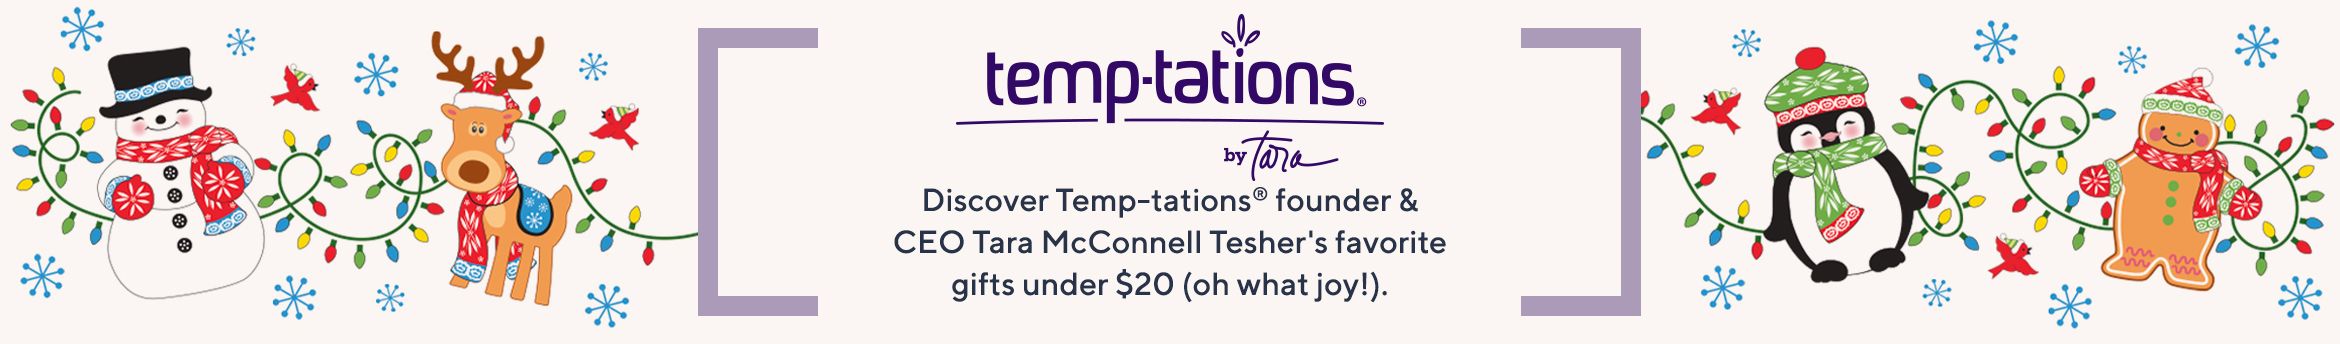 Temp-tations® by Tara. Discover Temp-tations® founder & CEO Tara McConnell Tesher's favorite gifts under $20 (oh what joy!). 